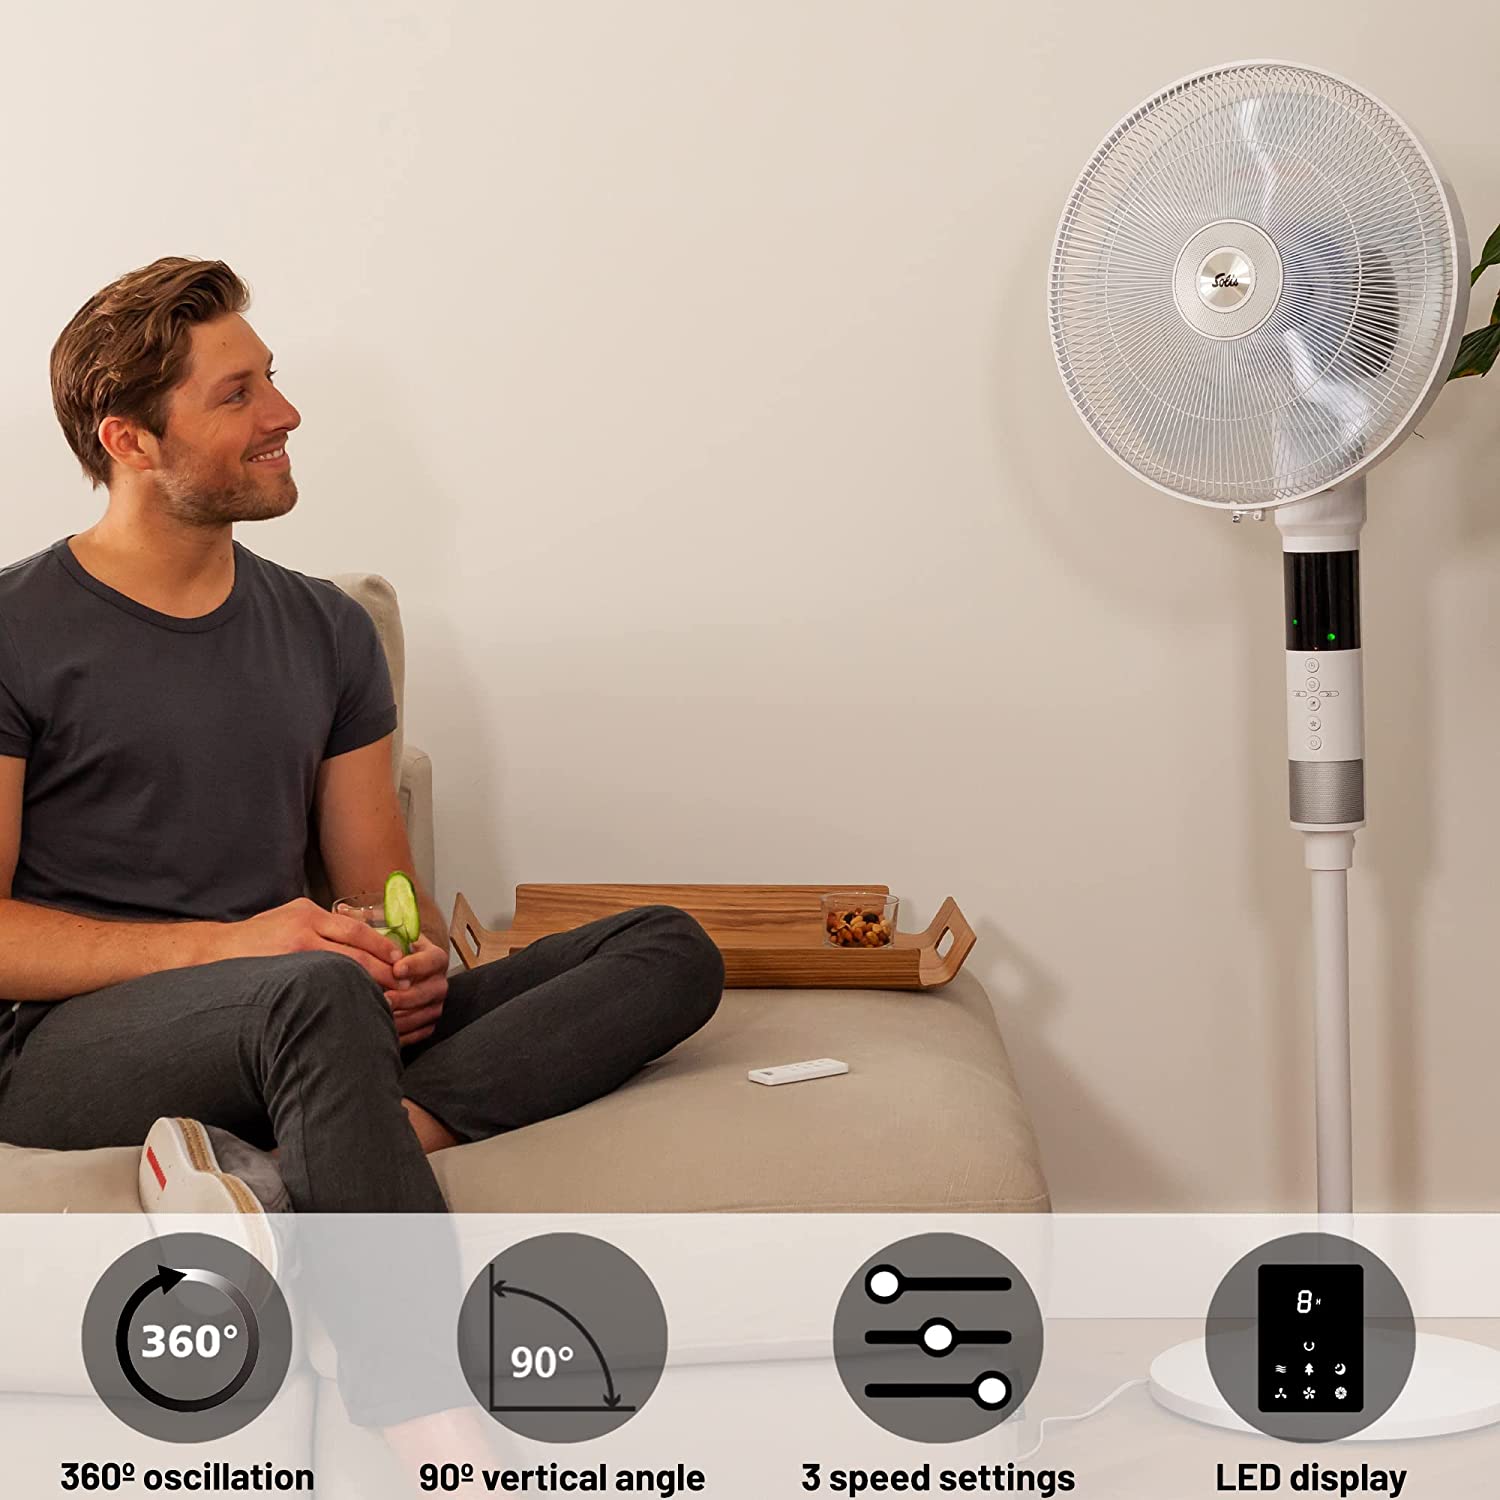 Solis Breeze 360° Standing Fan 7582-3 Different Speed Settings - With Infrared Remote Control - Adjustable Oscillating Fan - White